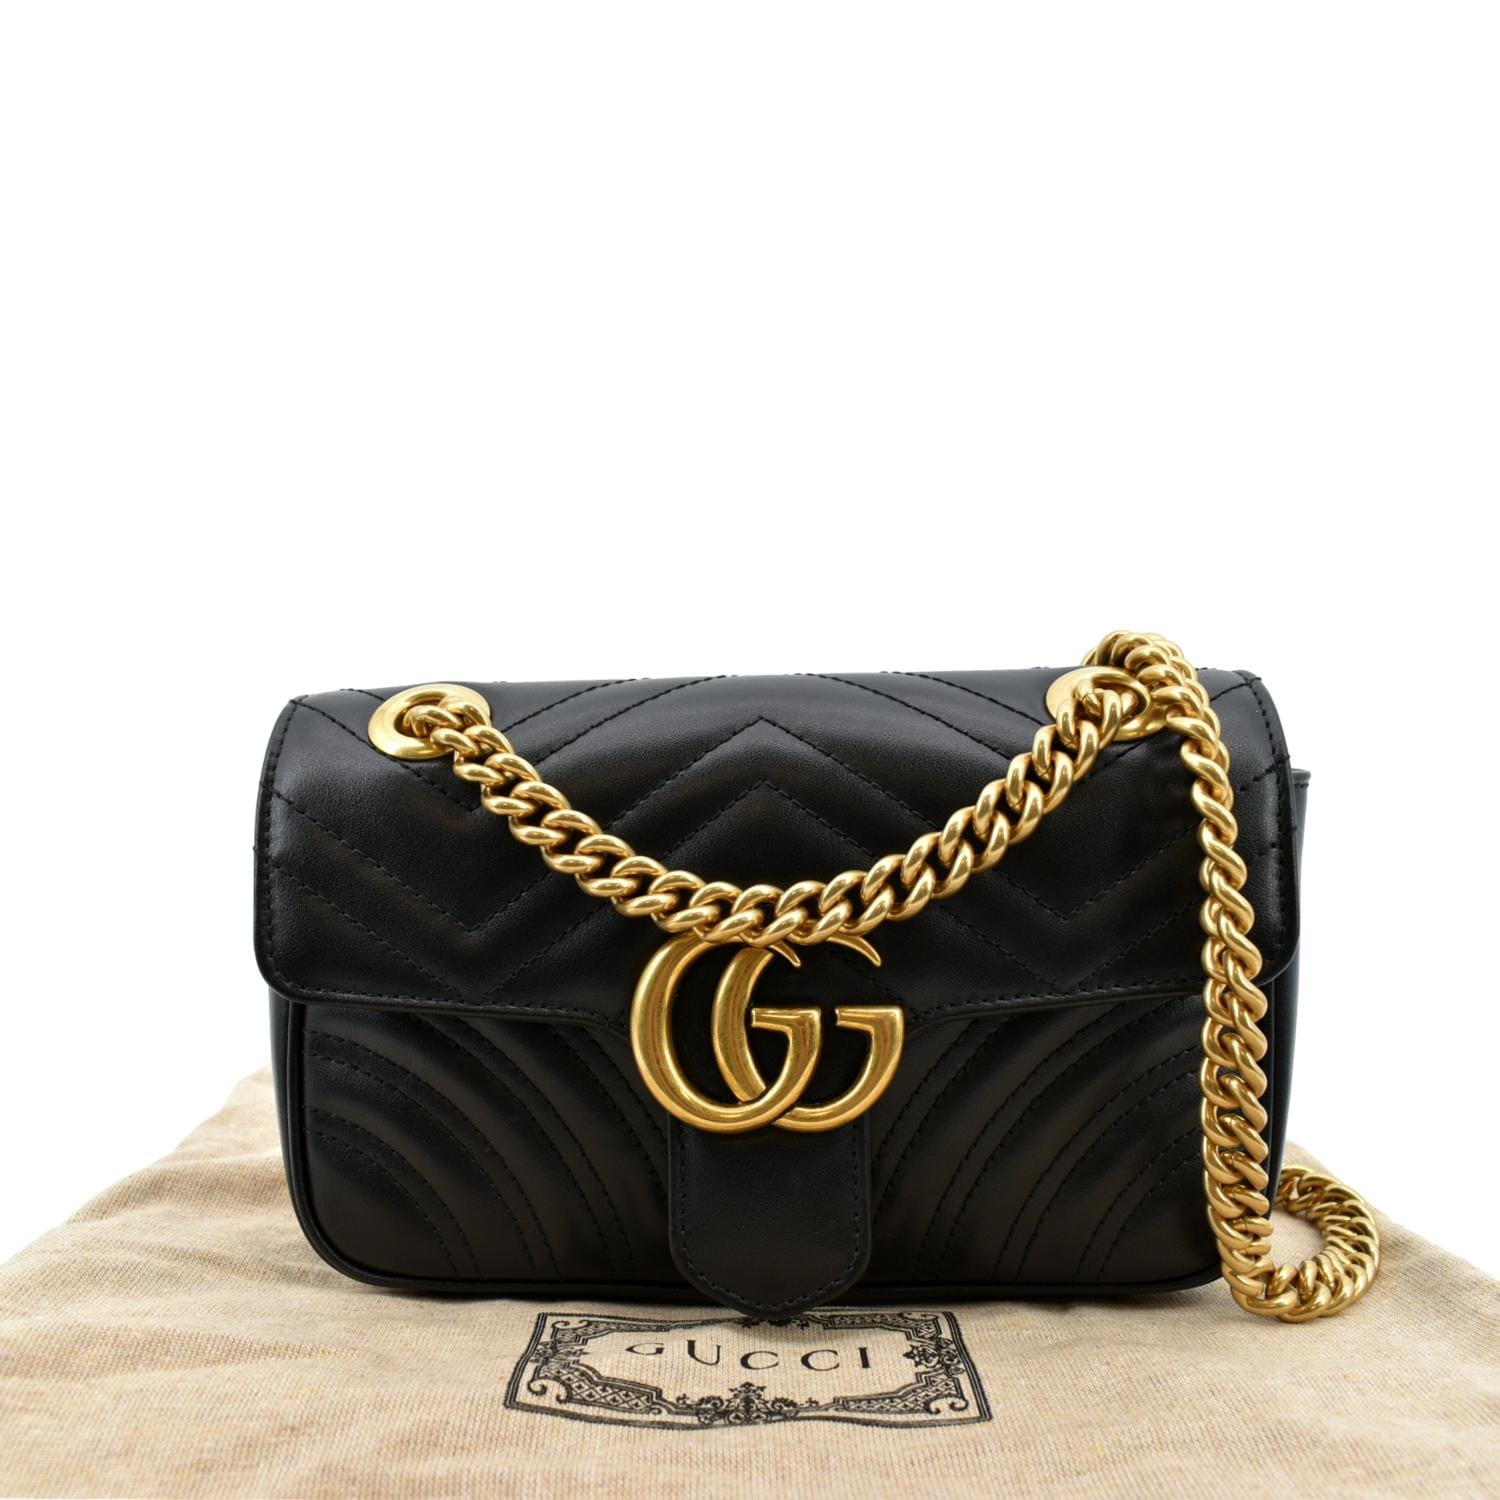 How To Spot A Fake Gucci Marmont Bag - Brands Blogger